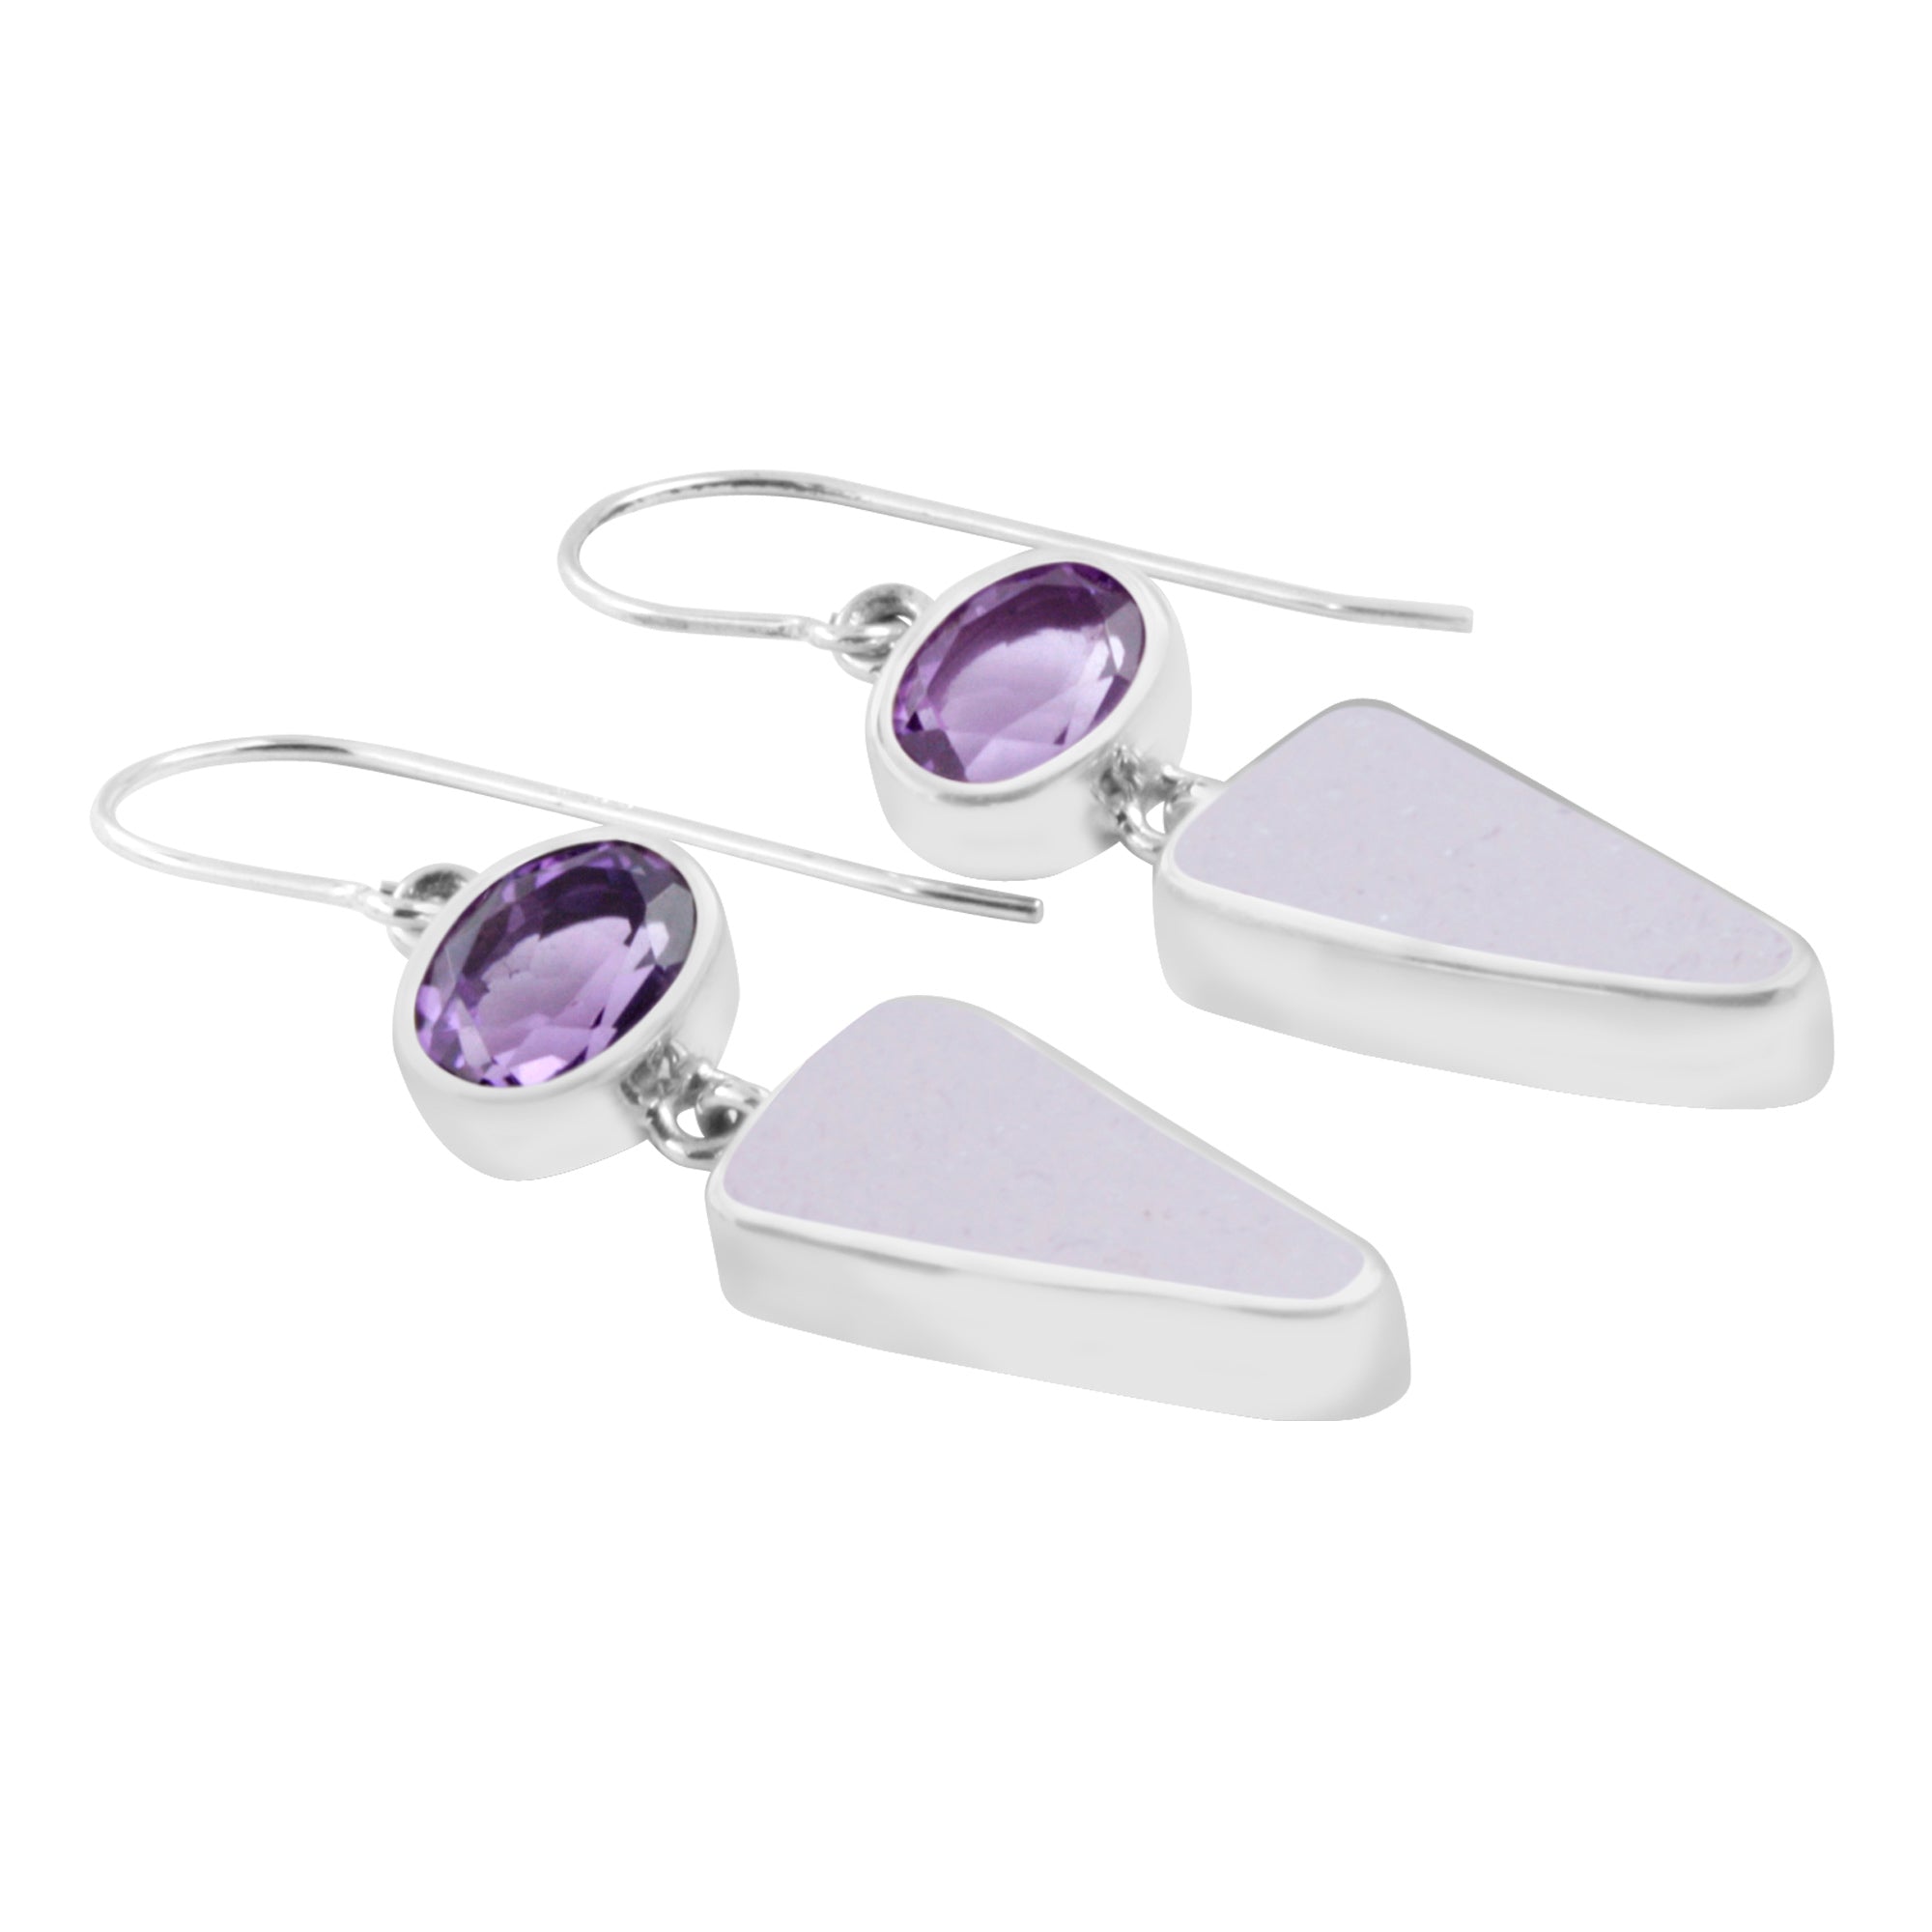 Stunning Amythyst and Lavander Seaglass Earring